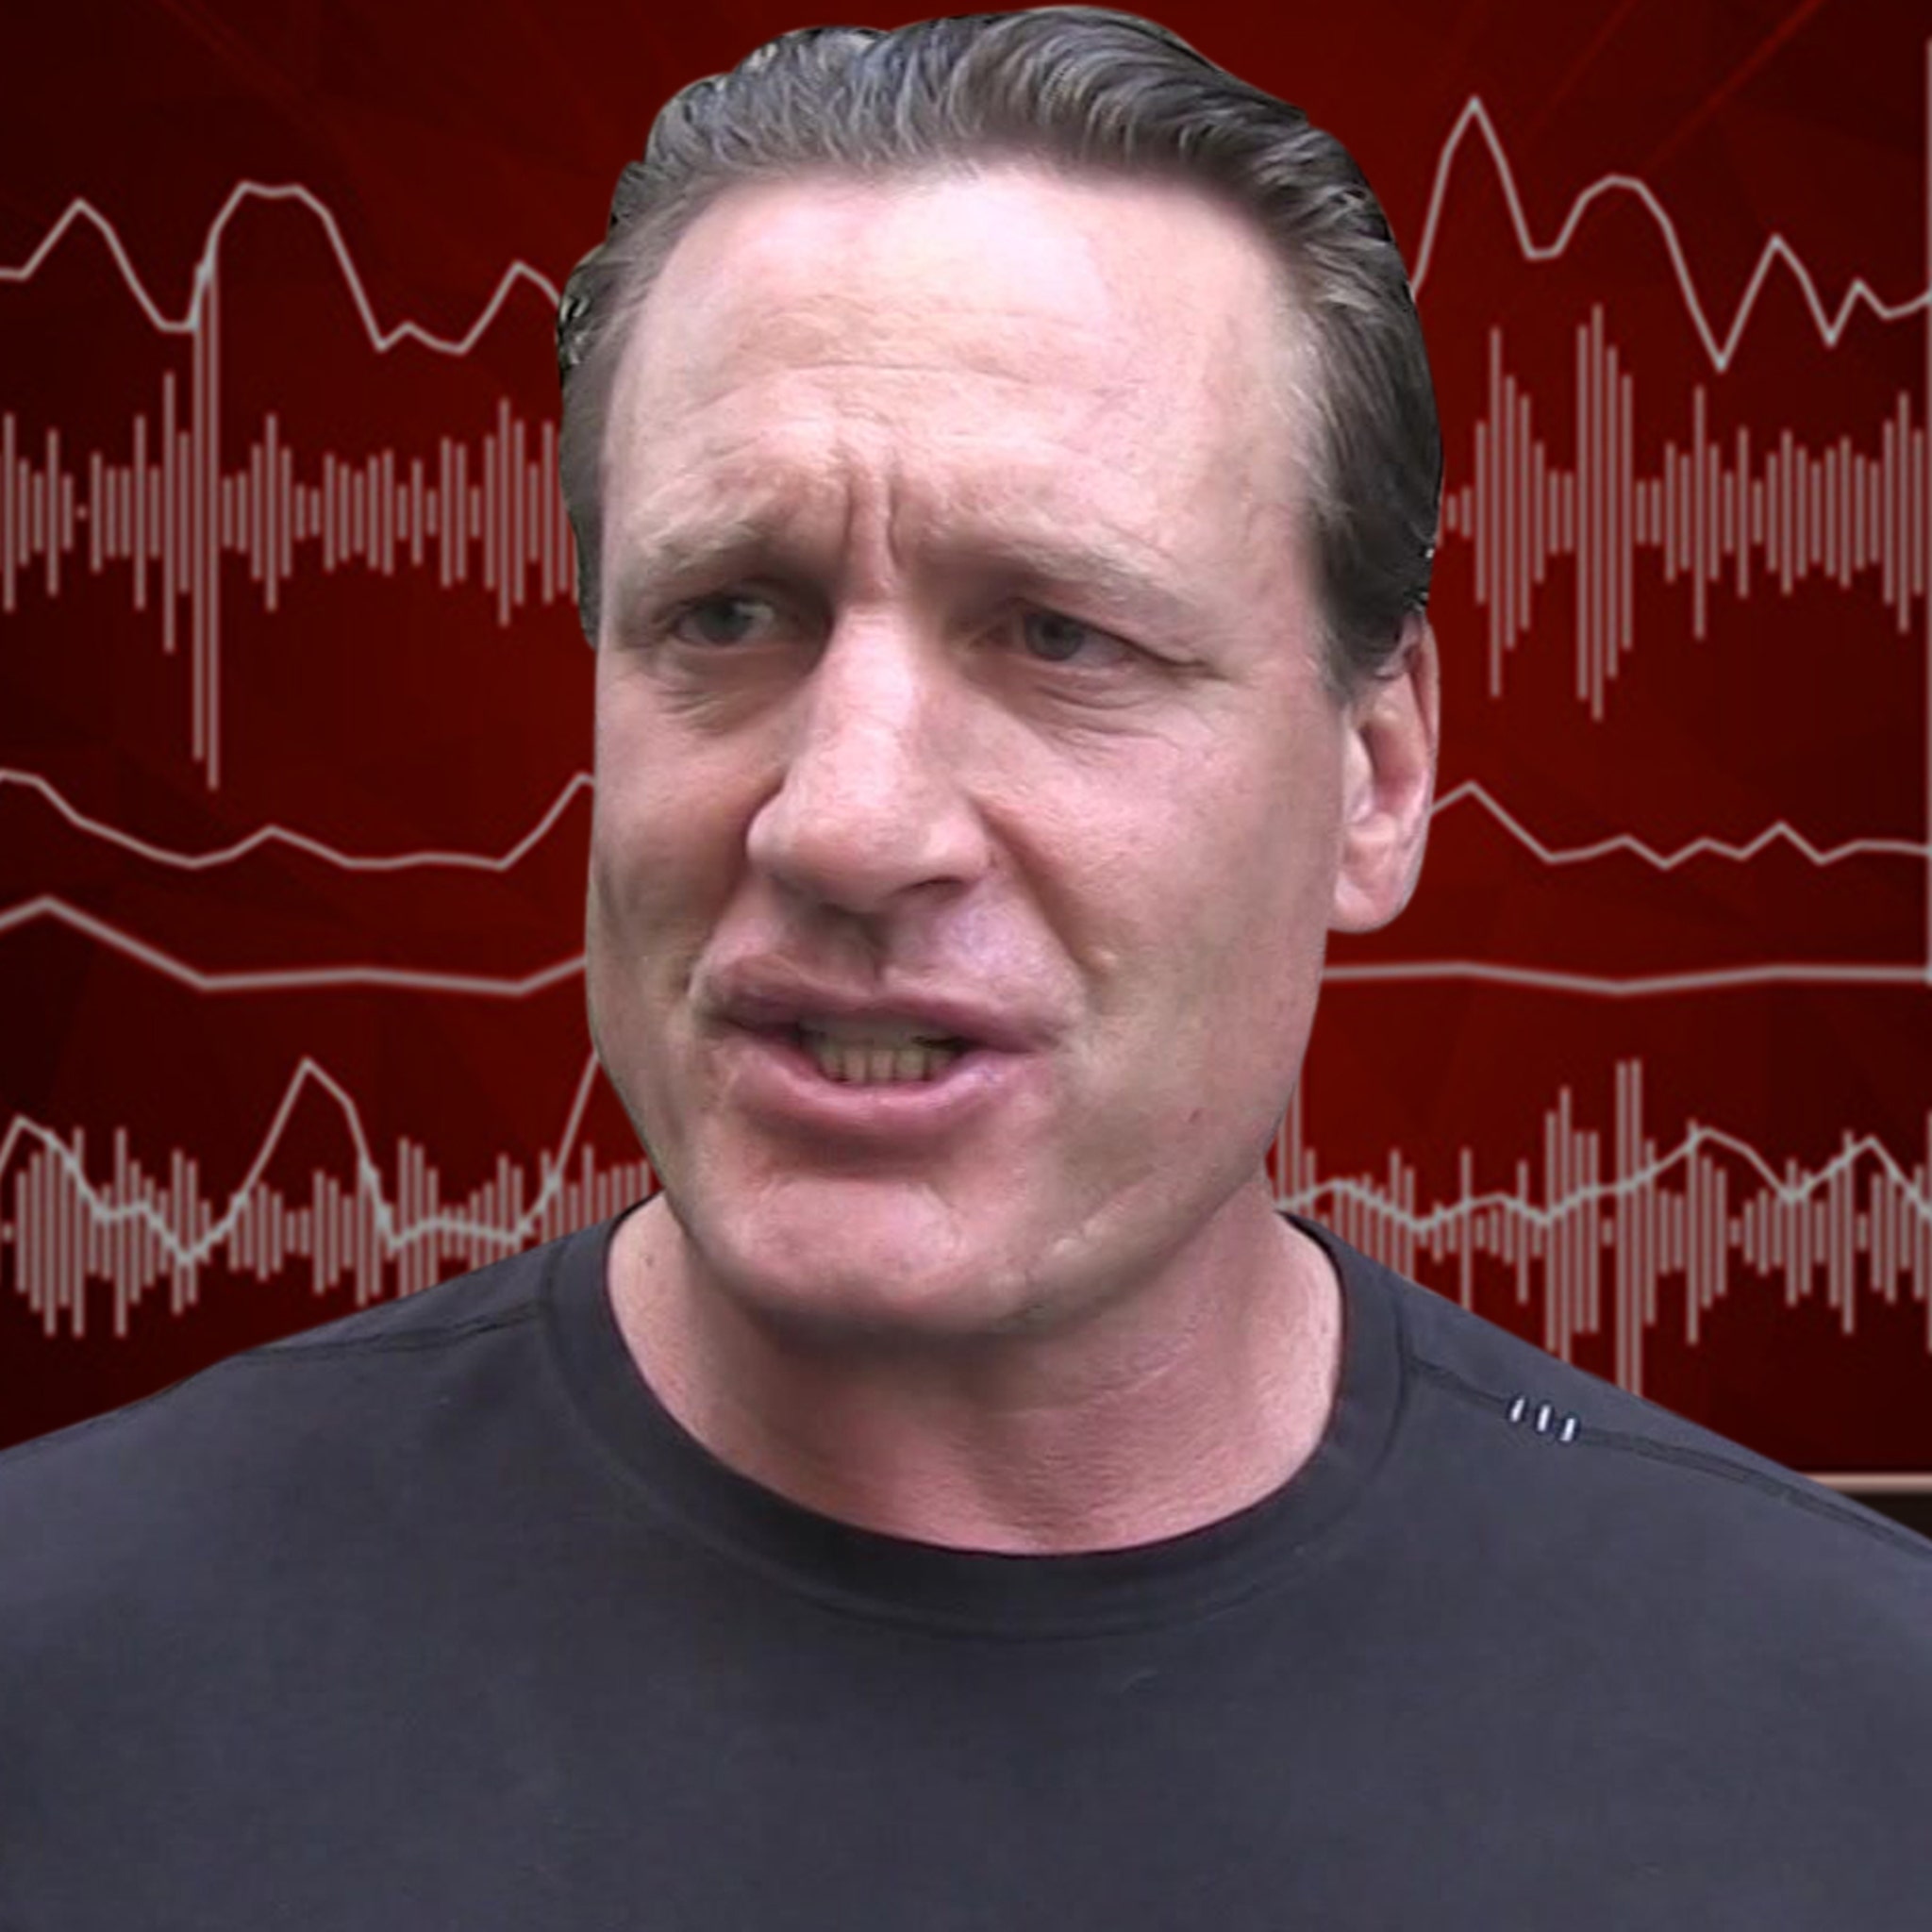 NBC suspends Jeremy Roenick over sexual comments involving colleagues